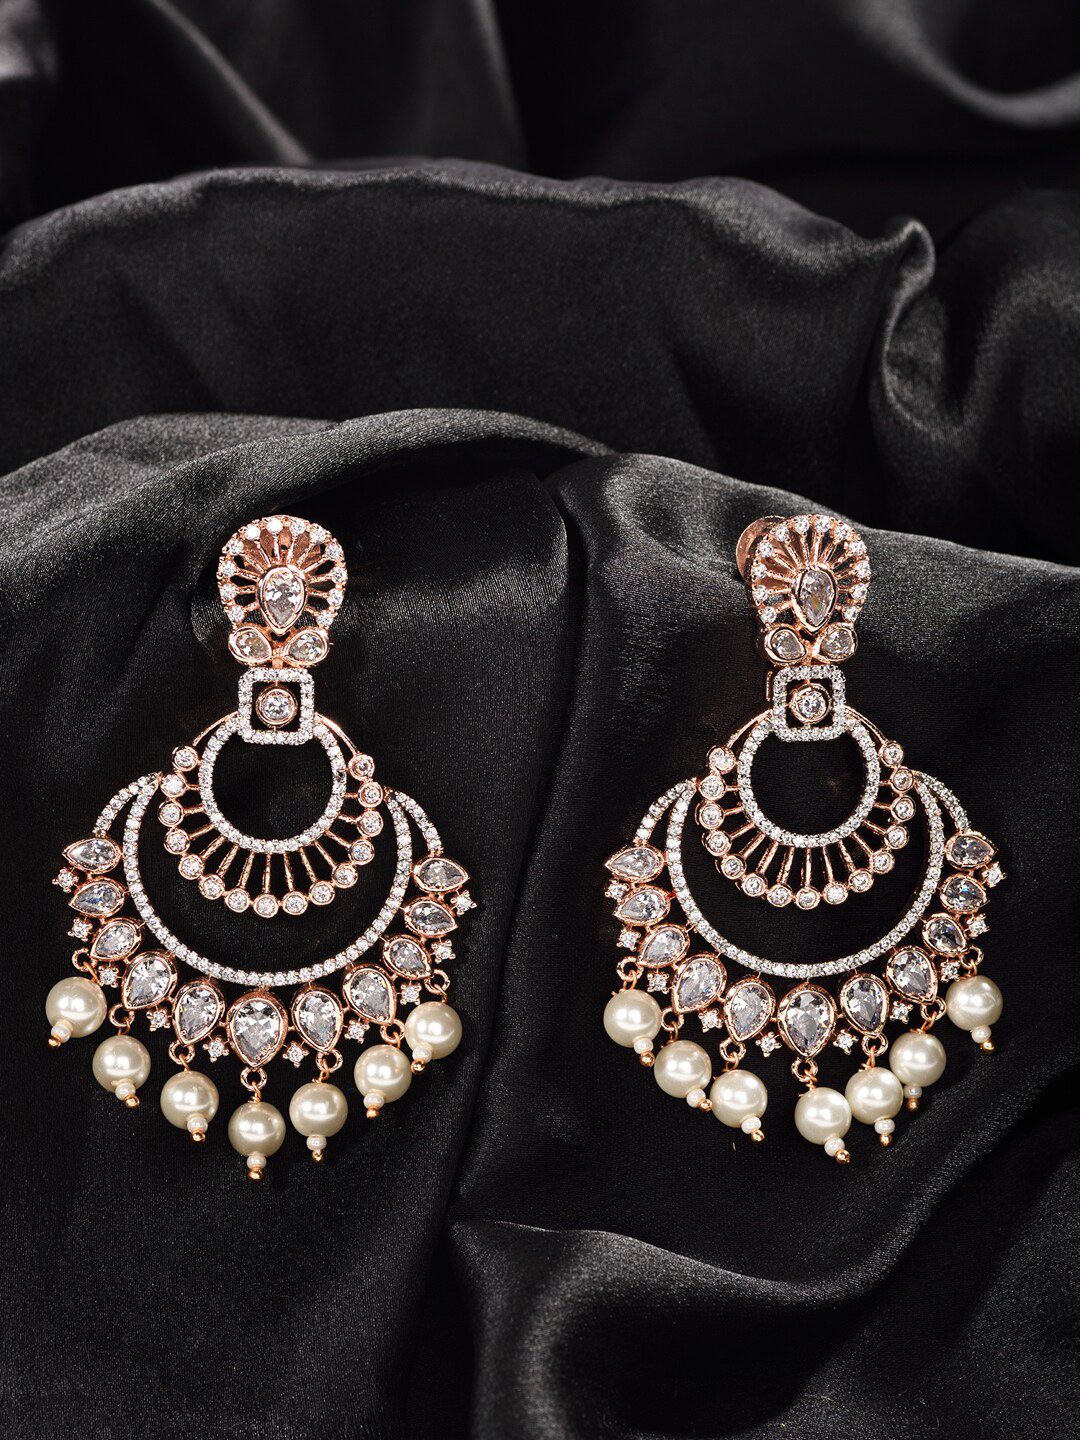 Saraf RS Jewellery White Contemporary Chandbalis Earrings Price in India